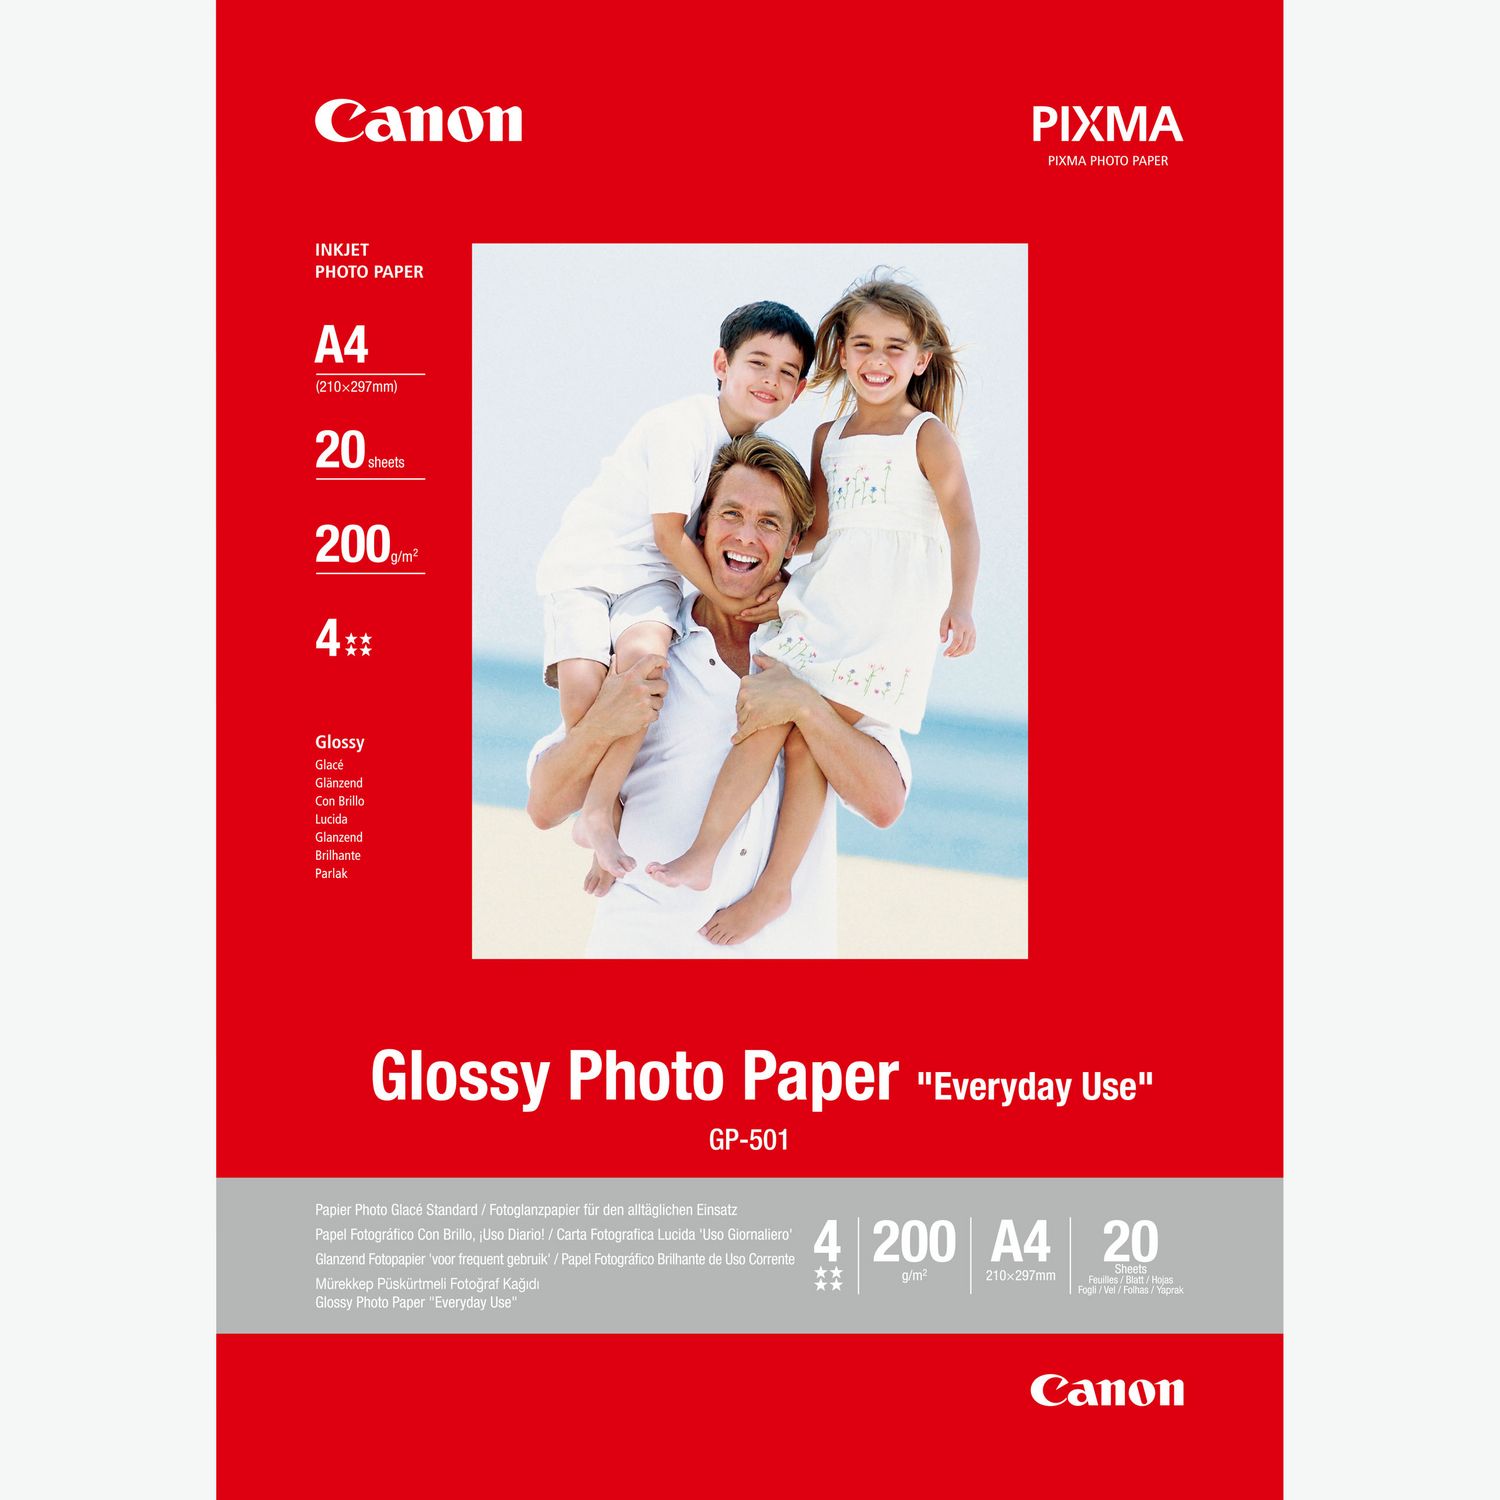 Specifications & Features - Canon PIXMA TS3450 Series - Canon Europe